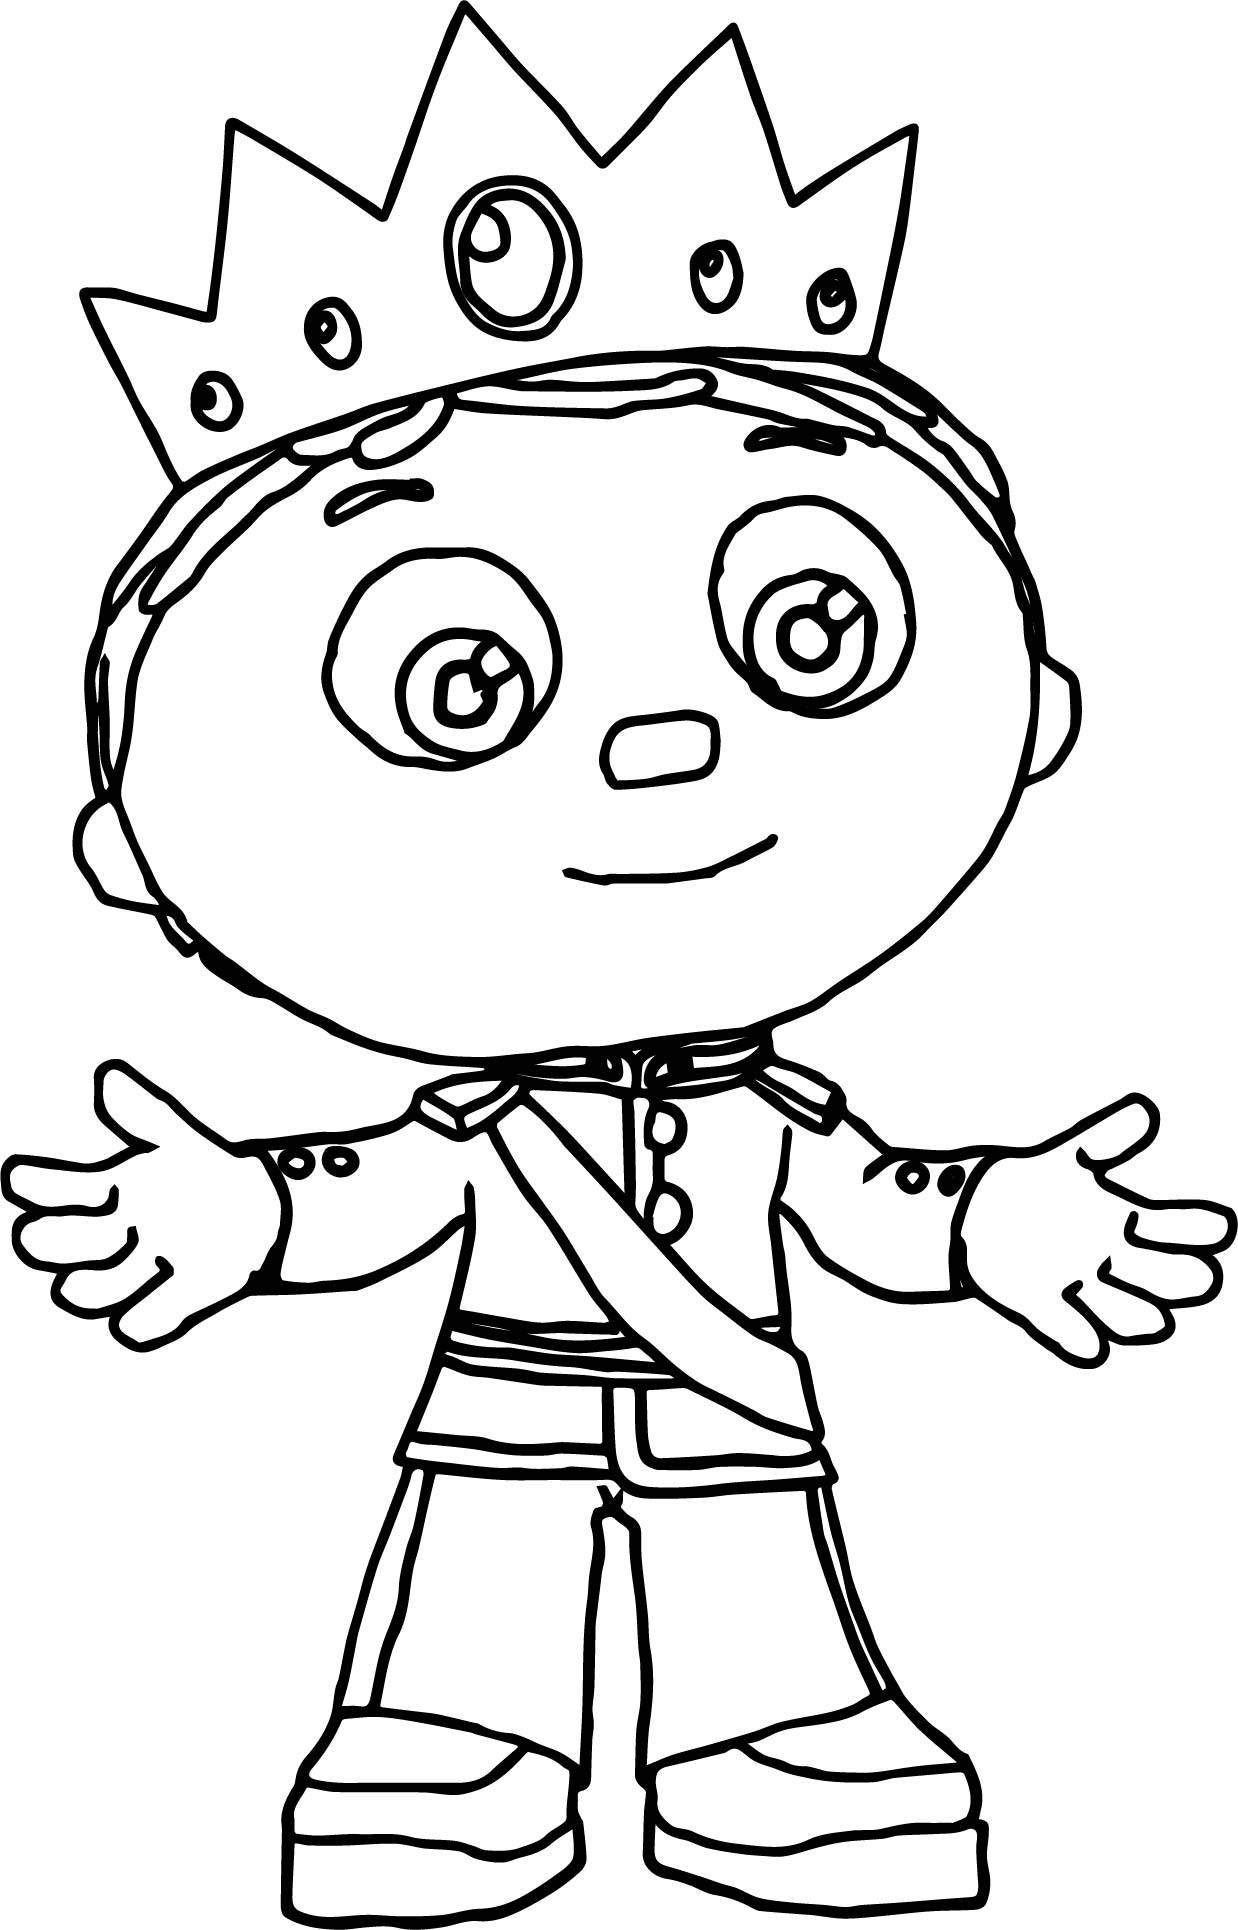 Free Printable Coloring Pages For Toddlers
 Super Why Coloring Pages Best Coloring Pages For Kids